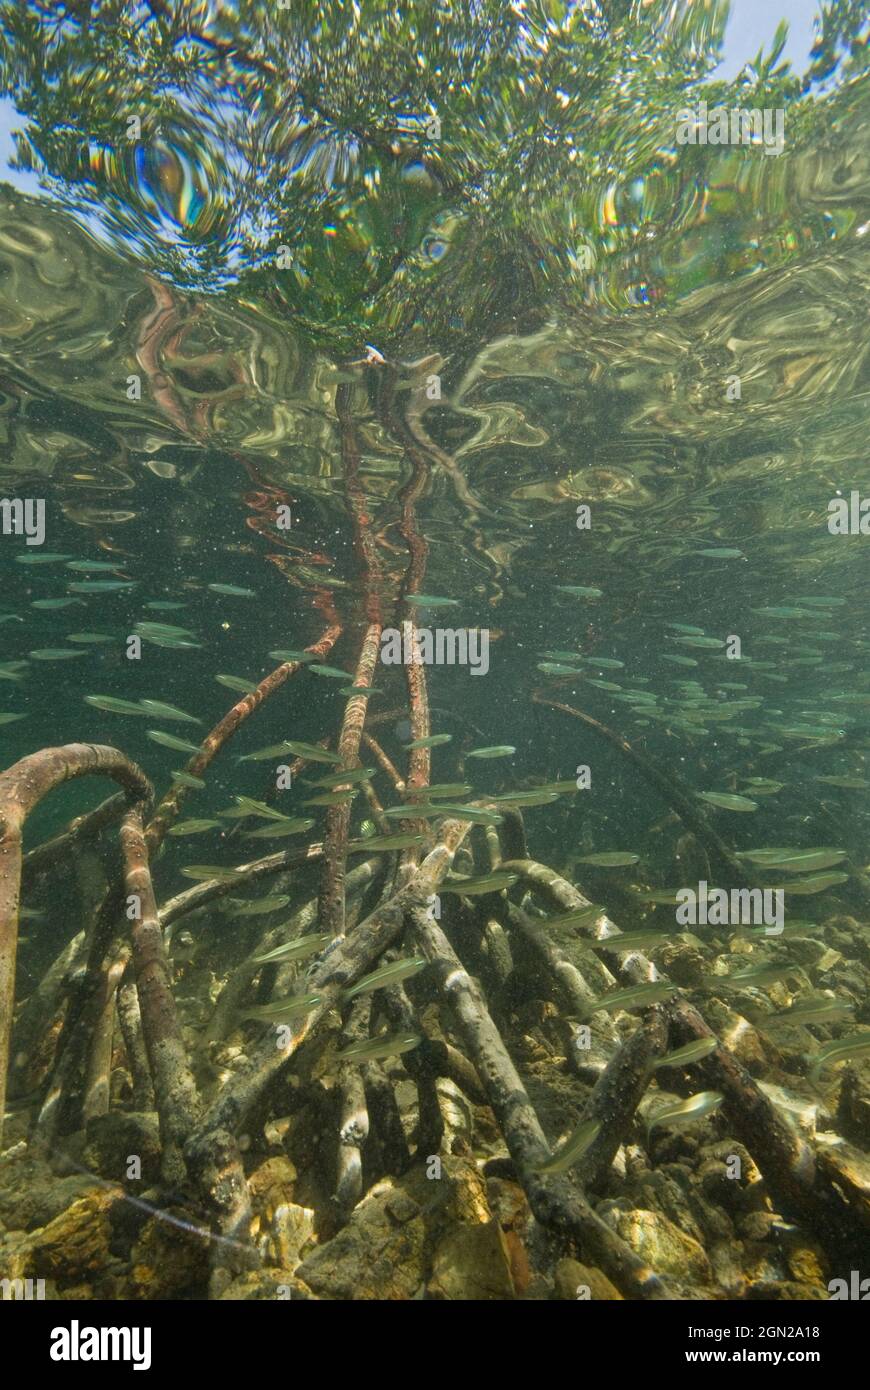 Stilt-rooted mangroves (Rhizophora stylosa), The name mangrove applies to particular tree species or whole communities of plants which inhabit tidal s Stock Photo